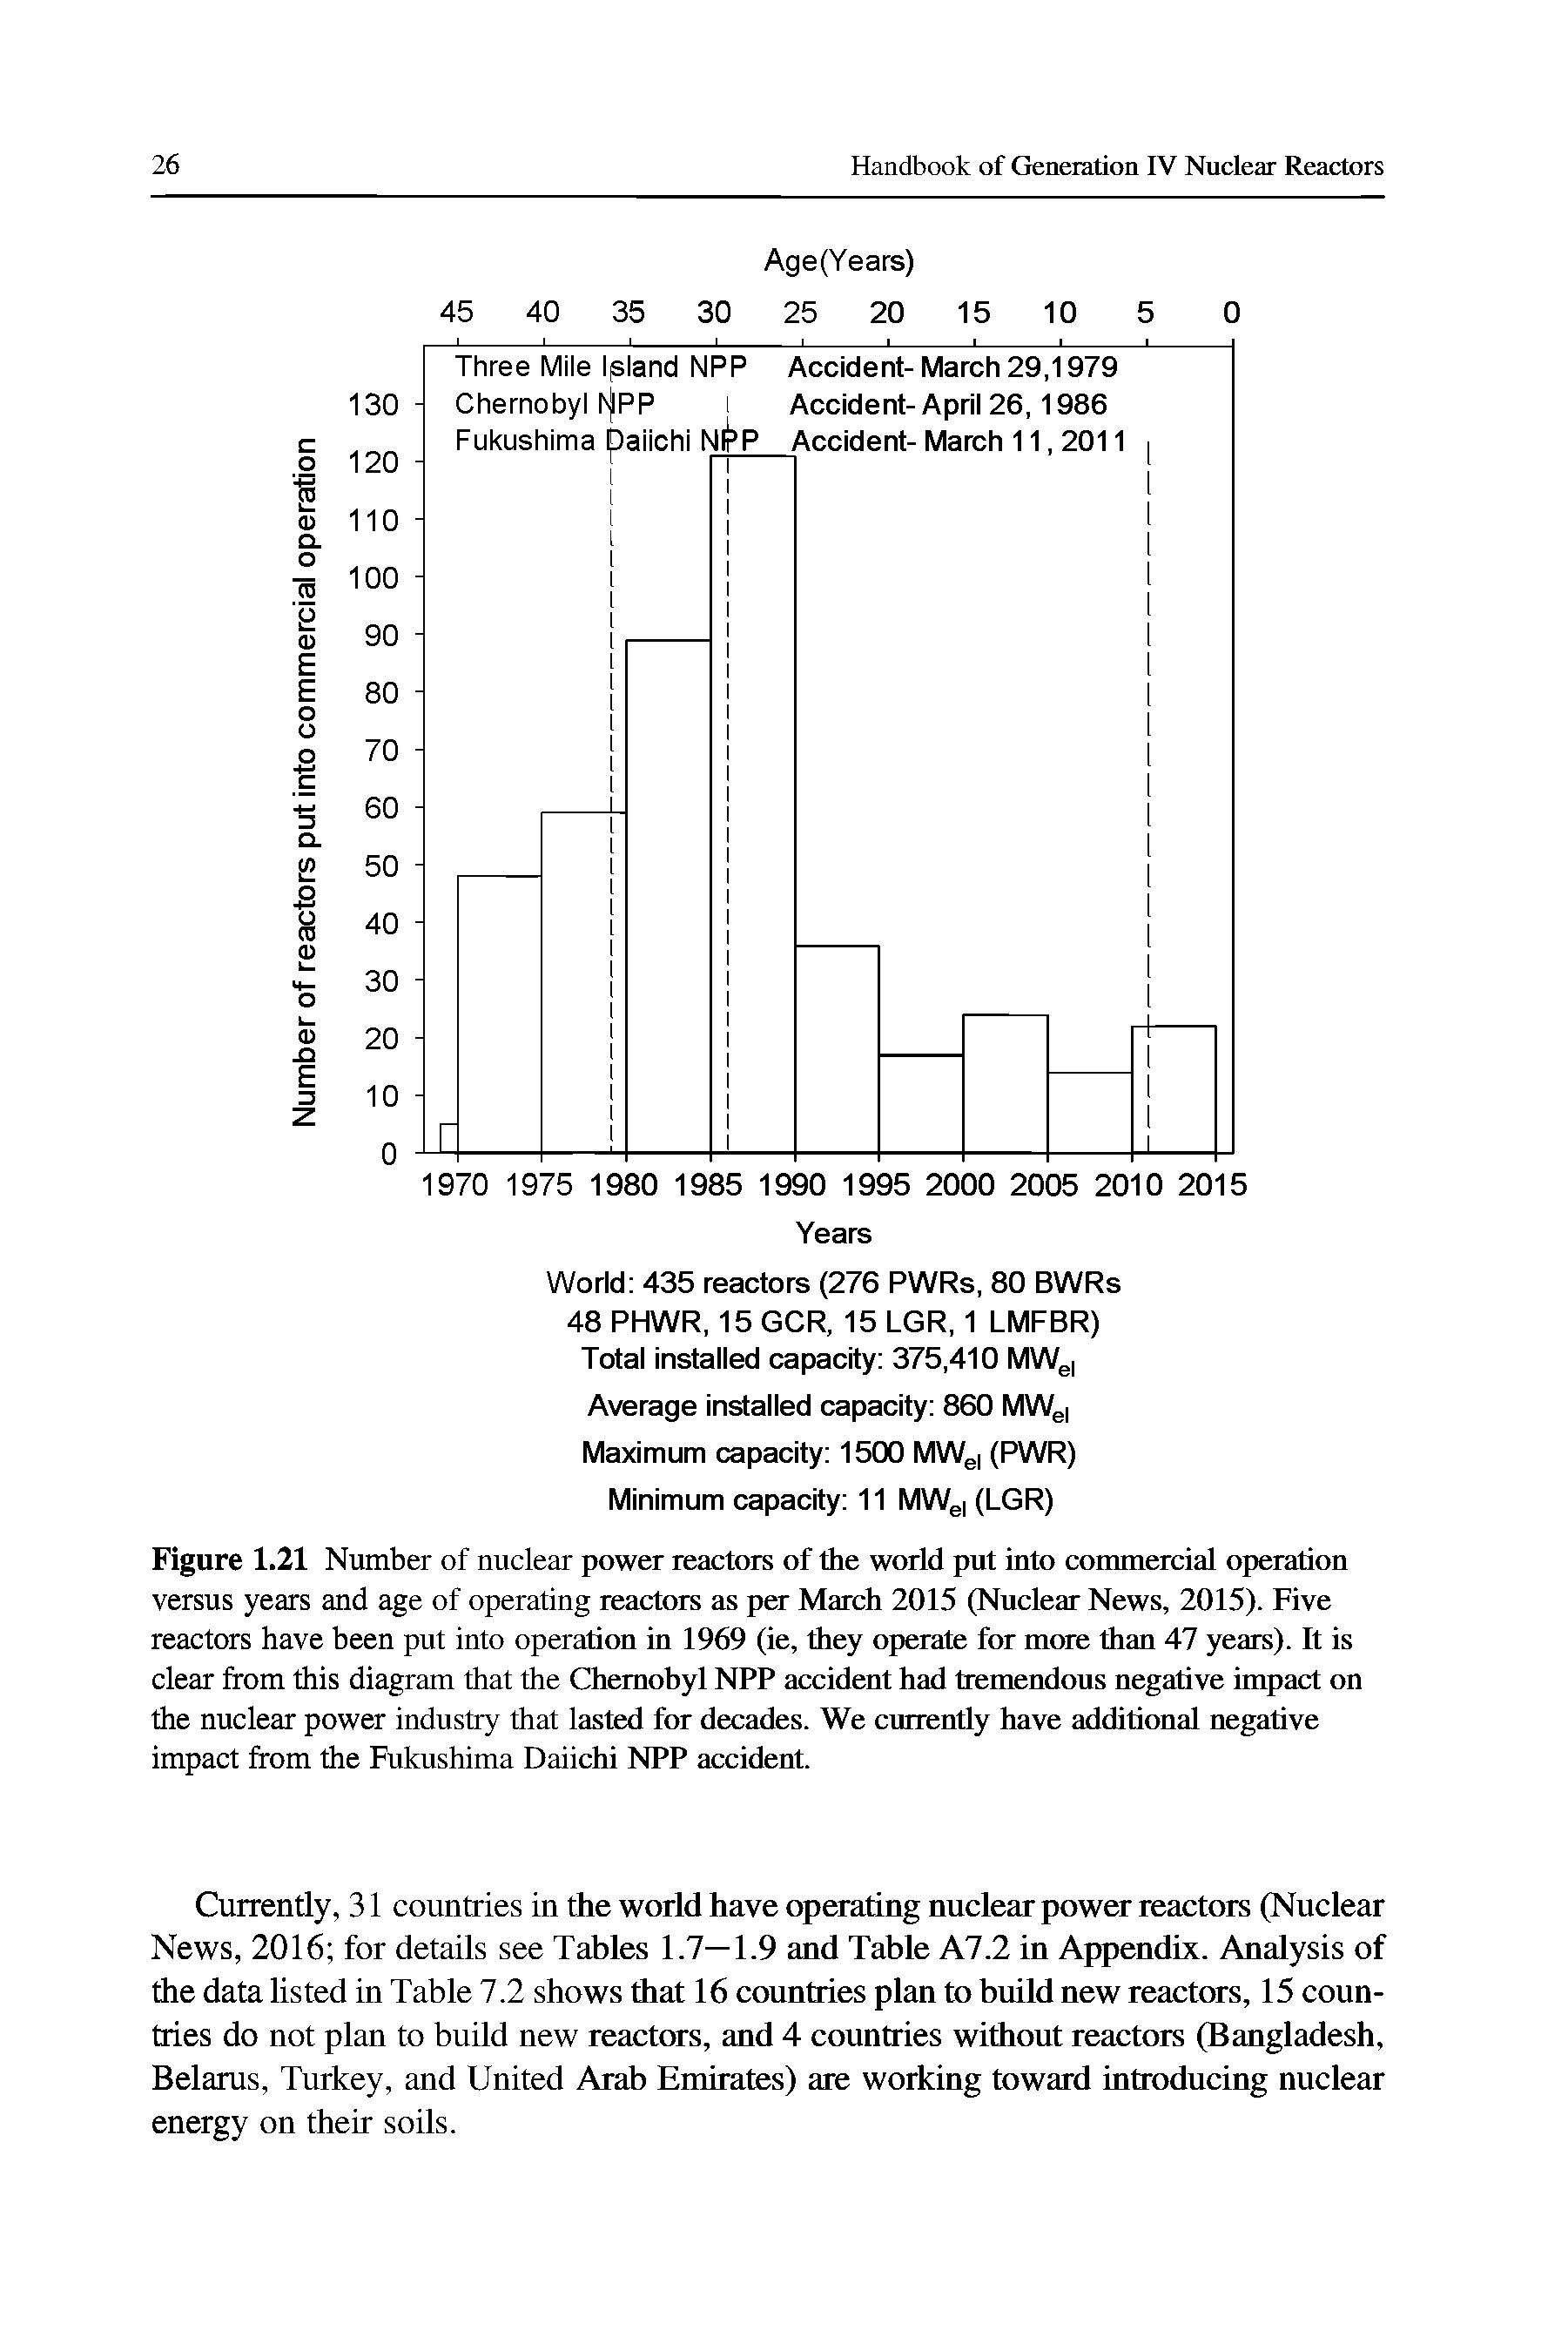 Figure 1.21 Number of nuclear power reactors of the world put into commercial operation versus years and age of operating reactors as per March 2015 (Nuclear News, 2015). Five reactors have been put into operation in 1969 (ie, they operate for mote than 47 years). It is clear from this diagram that the Chernobyl NPP accident had tremendous negative impact on the nuclear power industry that lasted for decades. We currently have additional negative impact from the Fukushima Daiichi NPP accident.